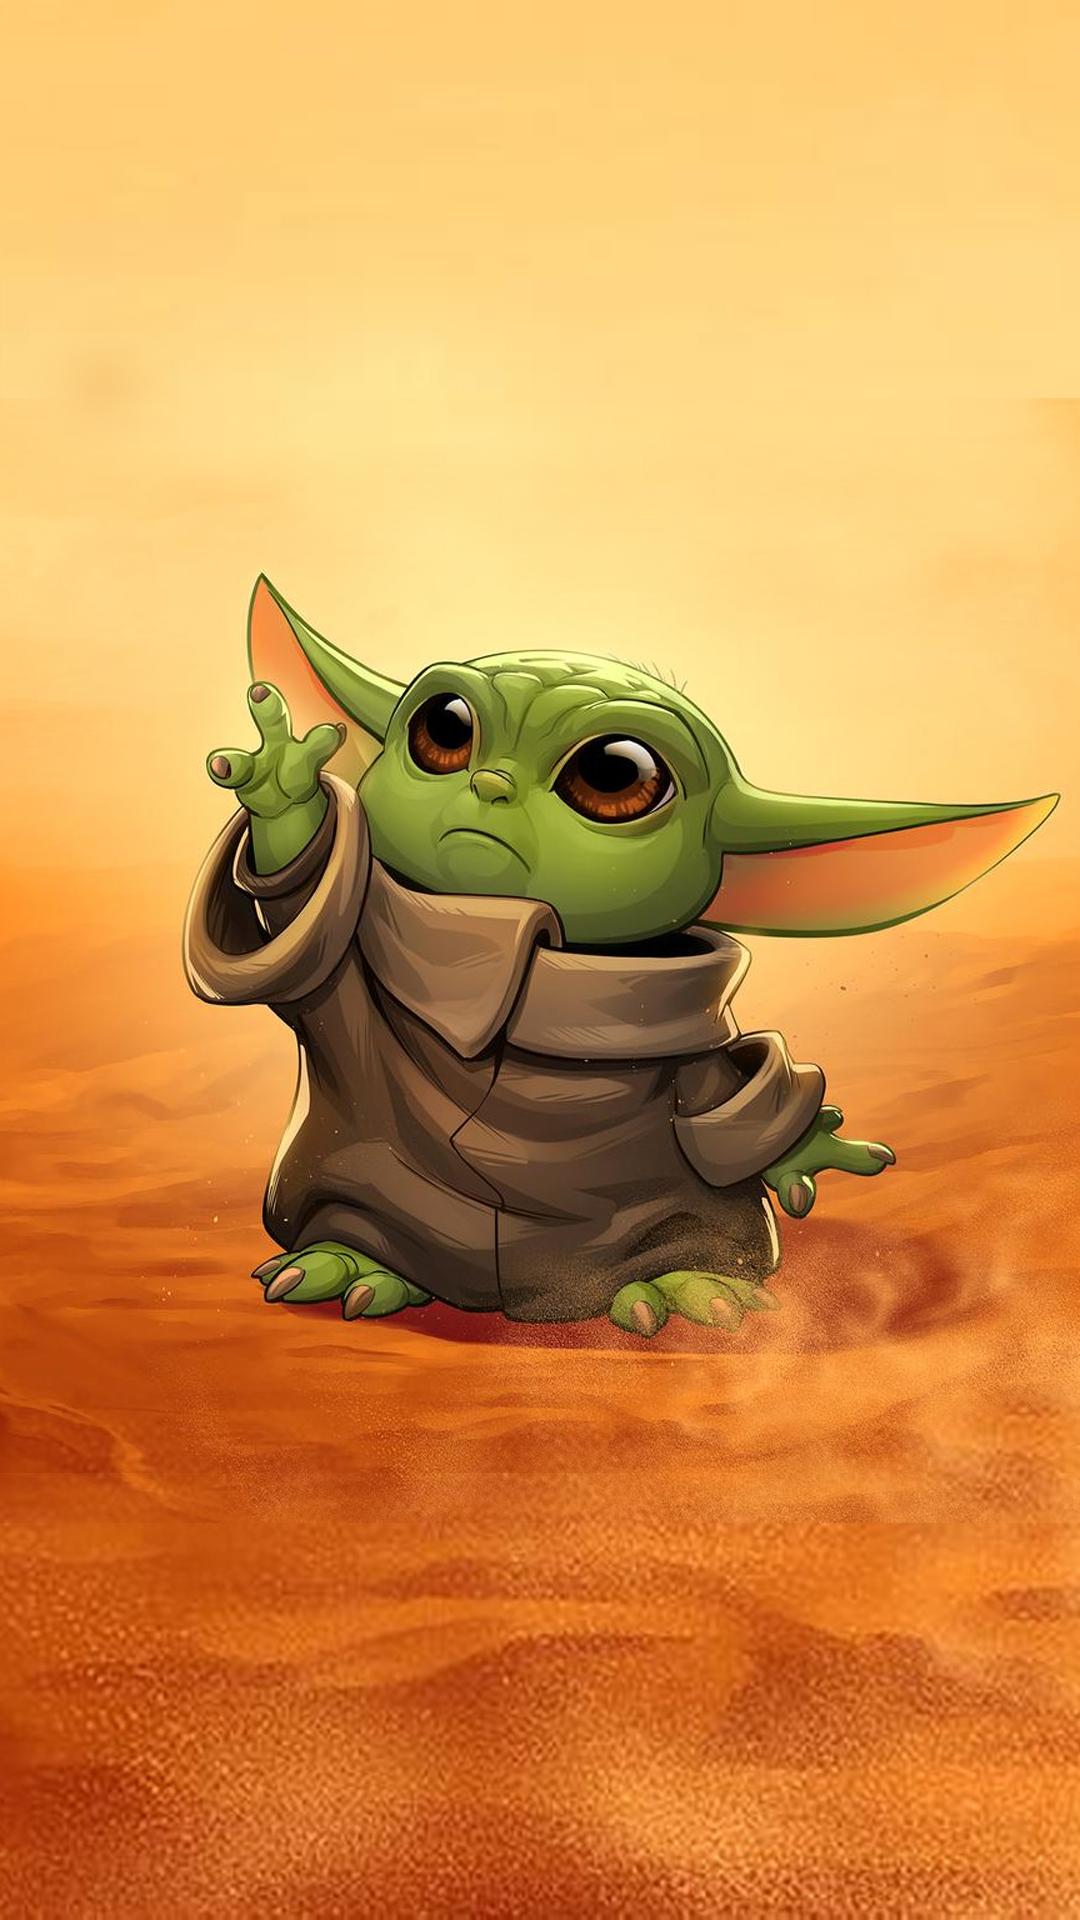 The child Baby Yoda background wallpapers HeroScreen   Cool